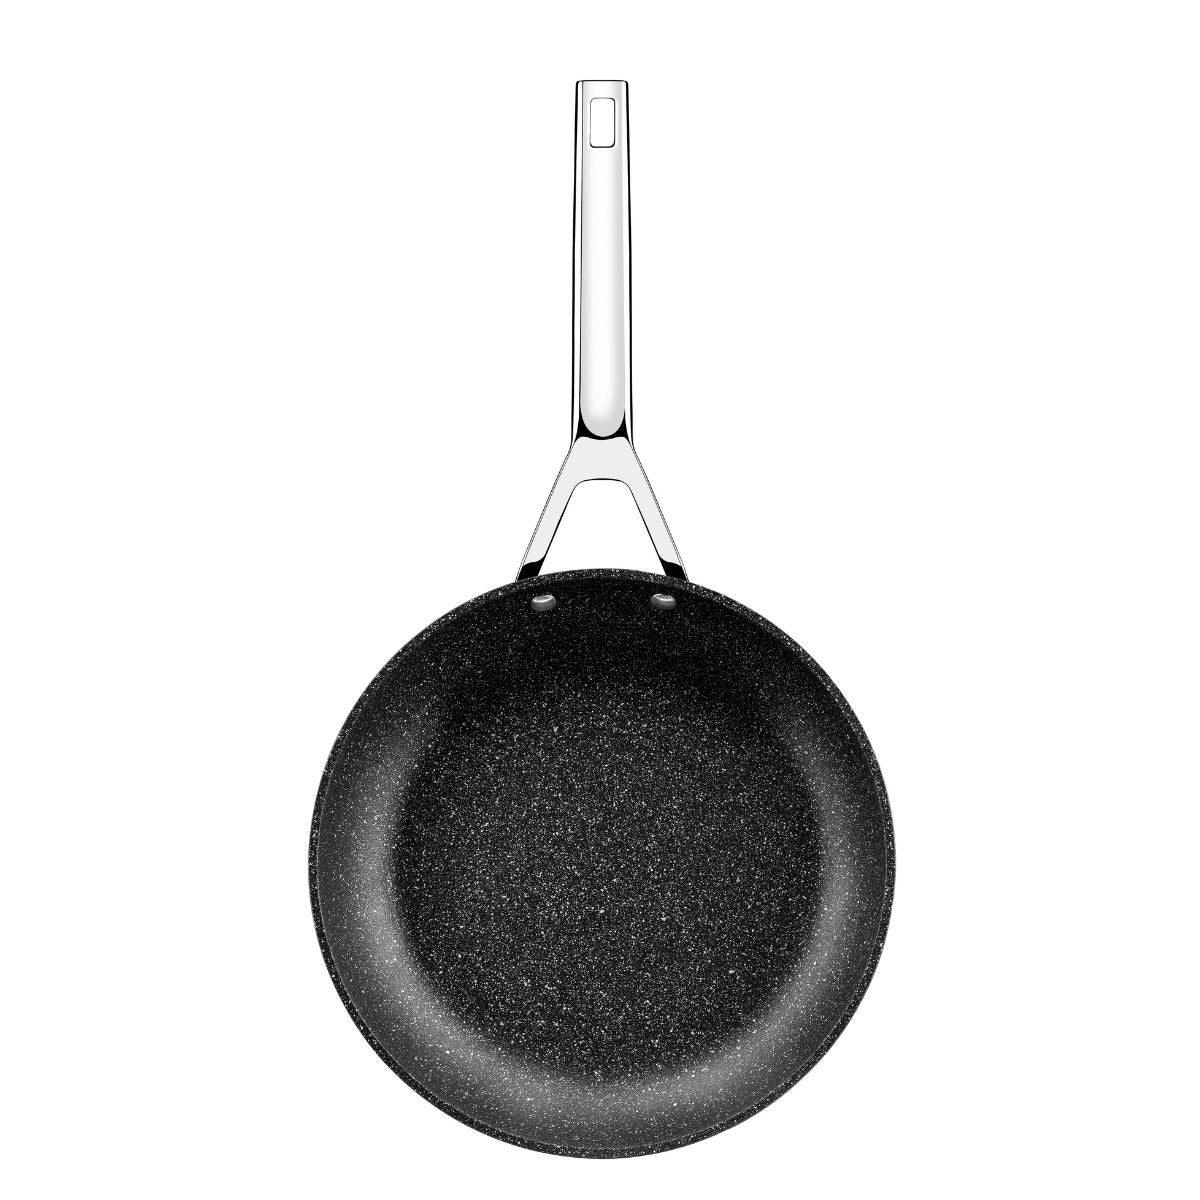 Mineral Frying Pan, 3-piece set